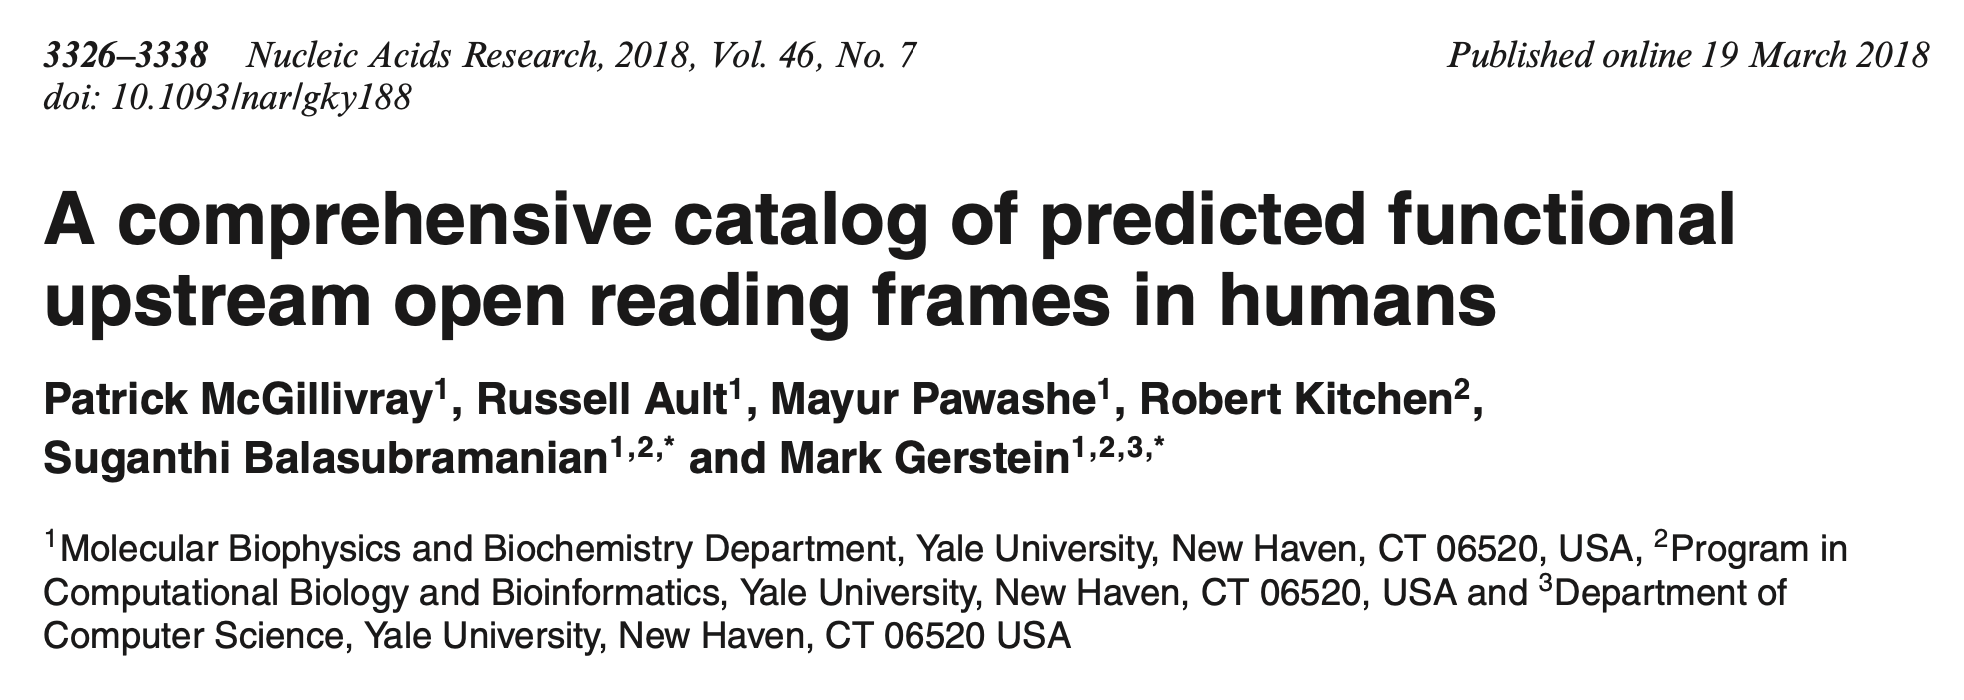 A comprehensive catalog of predicted functional upstream open reading frames in humans